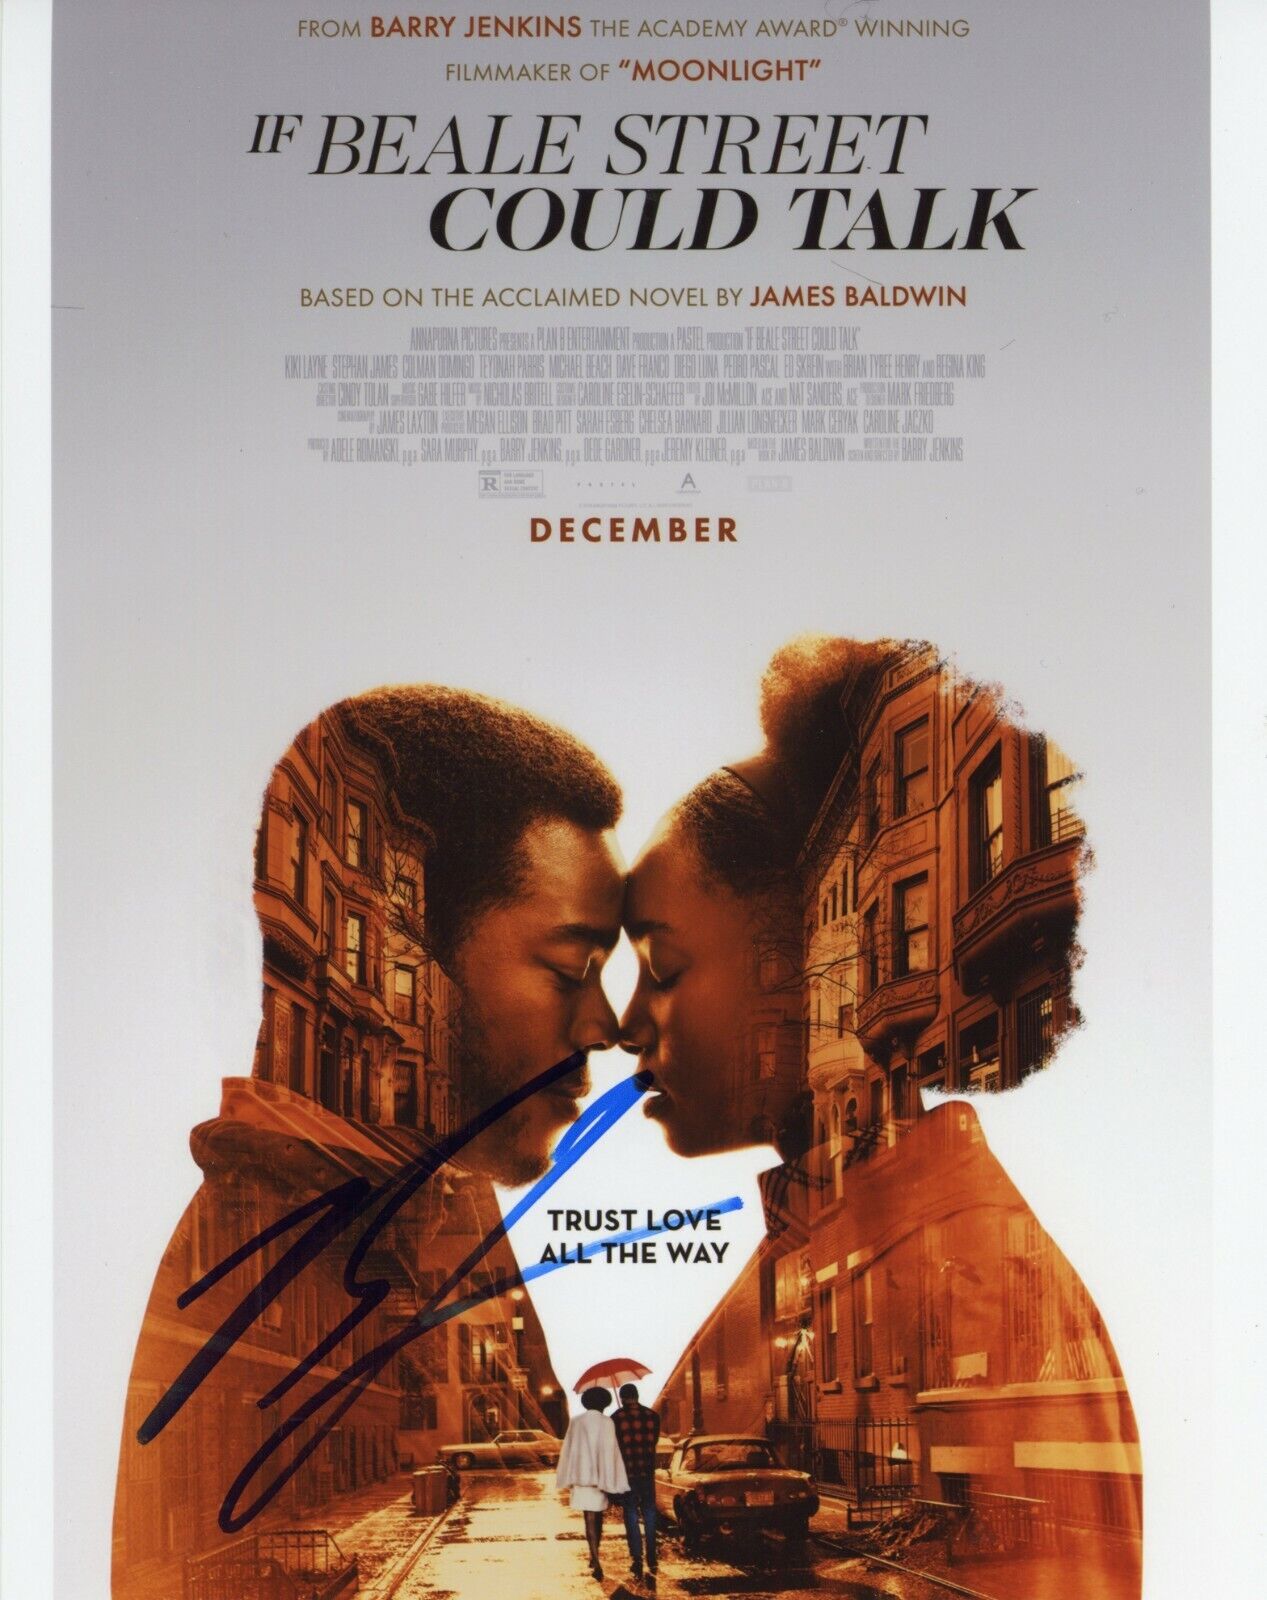 BARRY JENKINS Hand-Signed Director - If Beale Street Could Talk